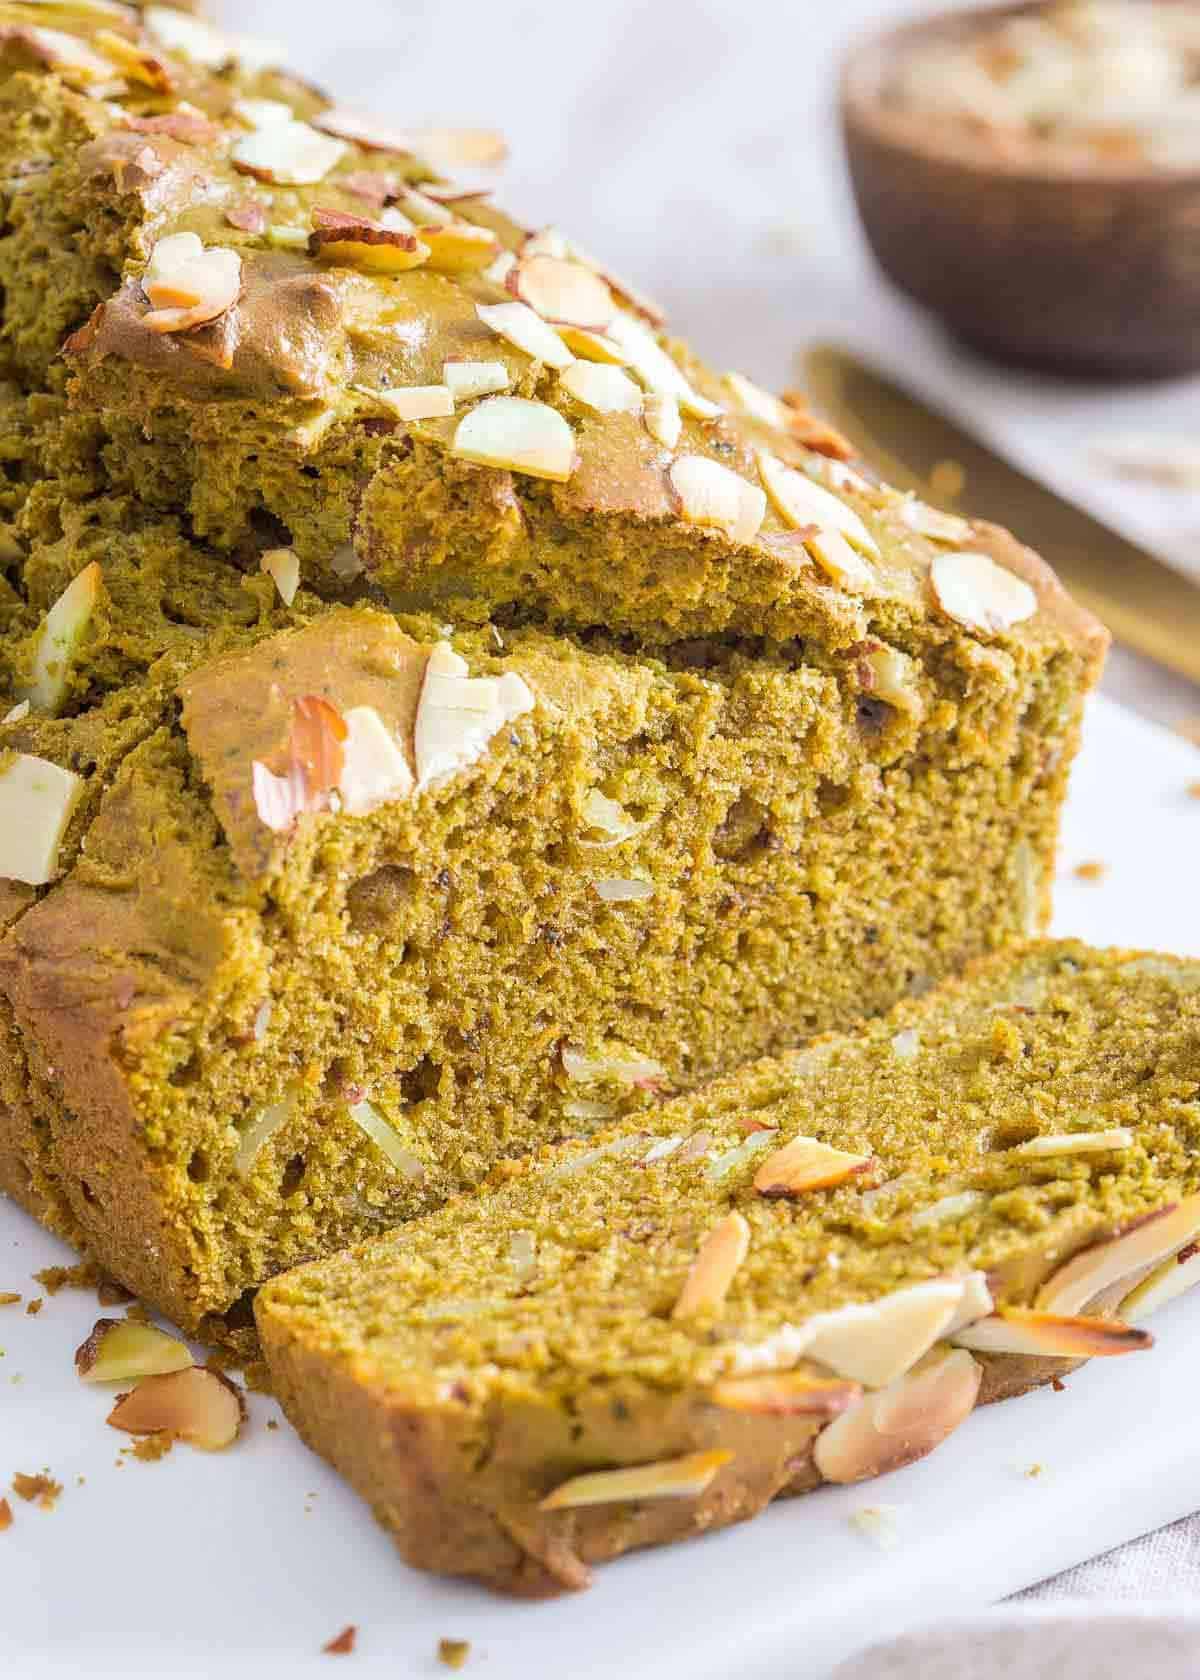 Matcha bread loaf with a slice.